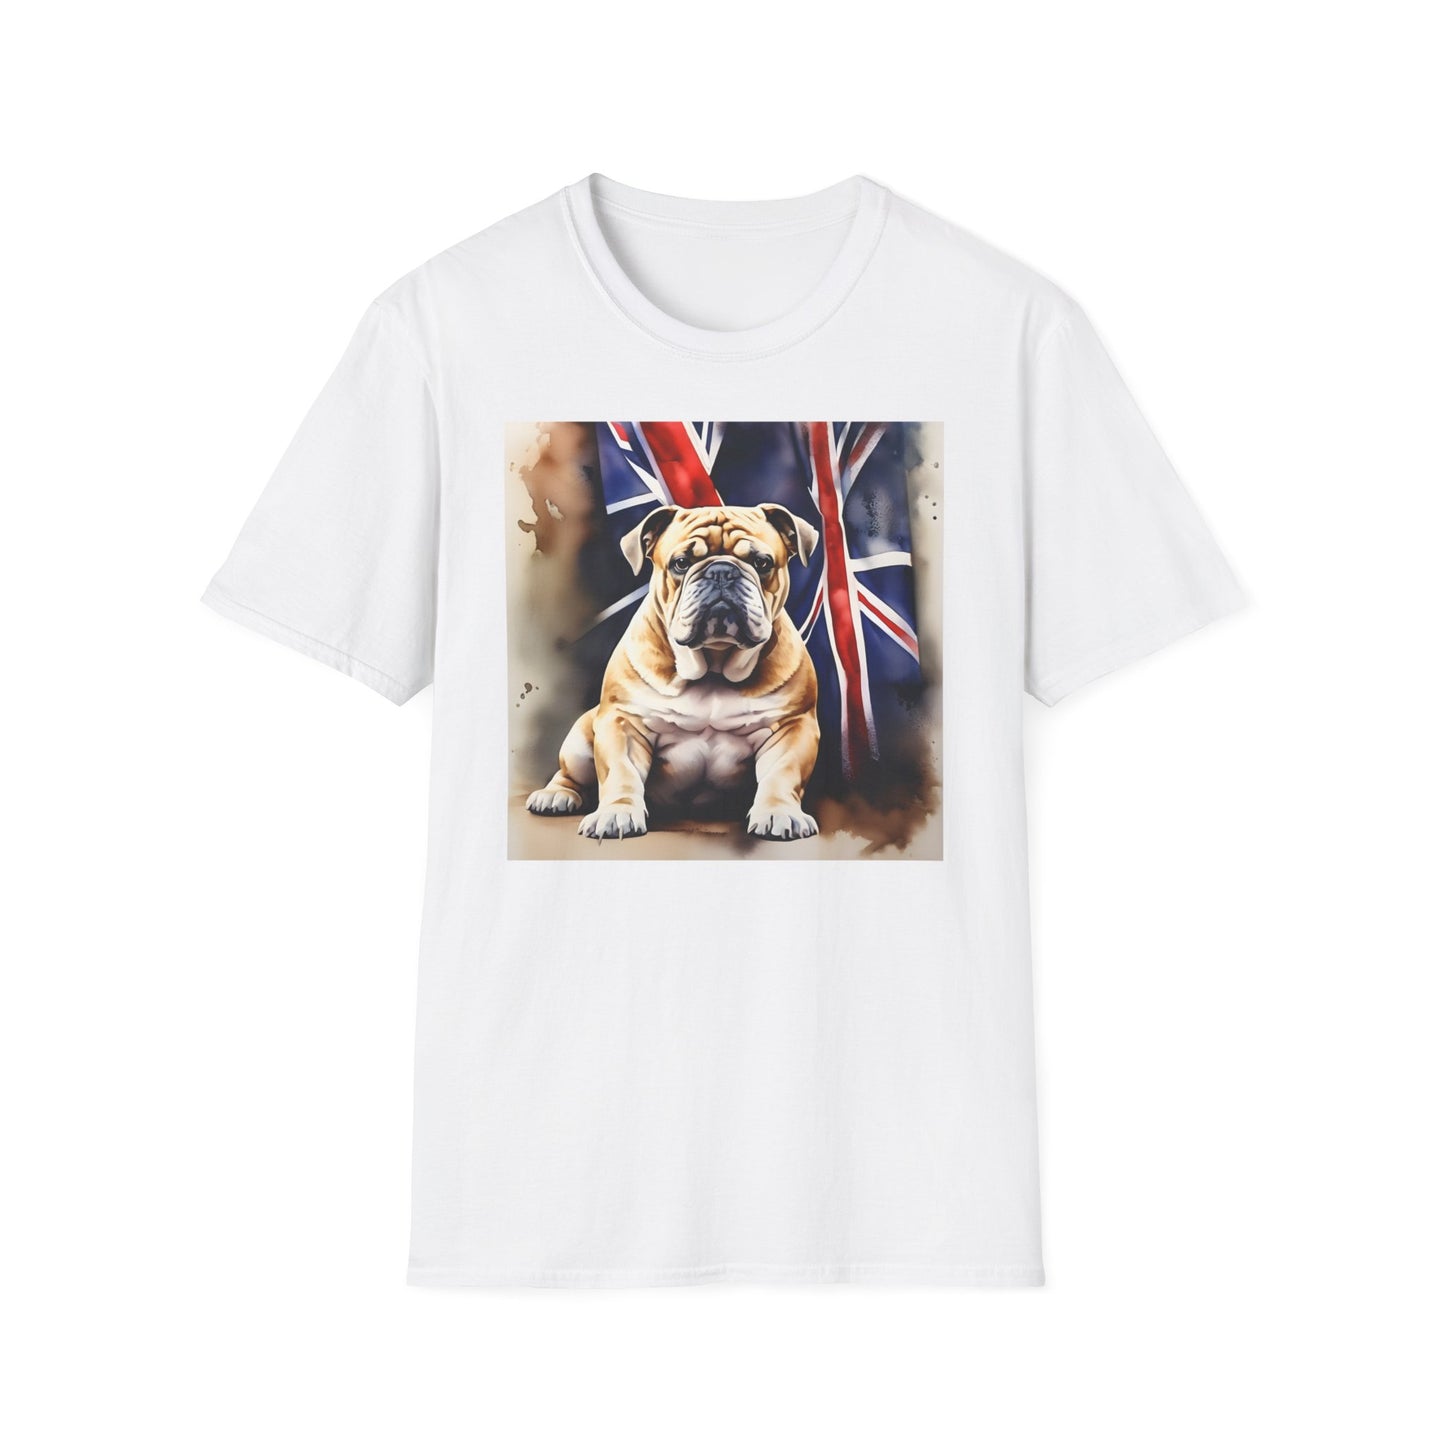 A white t-shirt with a watercolour painting of a British Bulldog. Behind him is a Union Jack flag